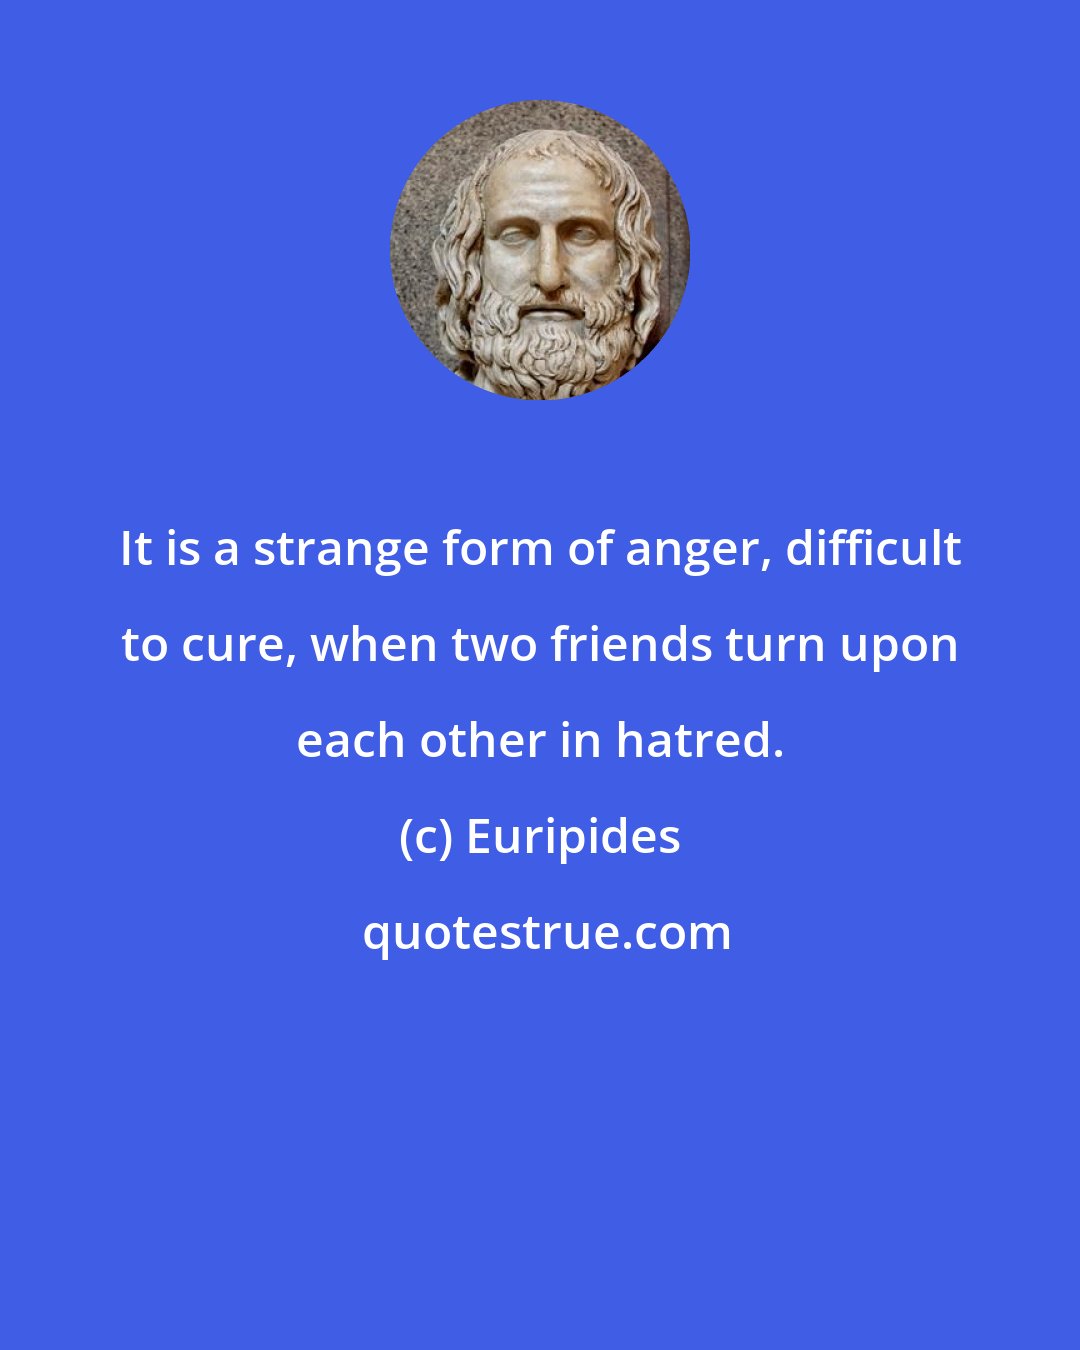 Euripides: It is a strange form of anger, difficult to cure, when two friends turn upon each other in hatred.